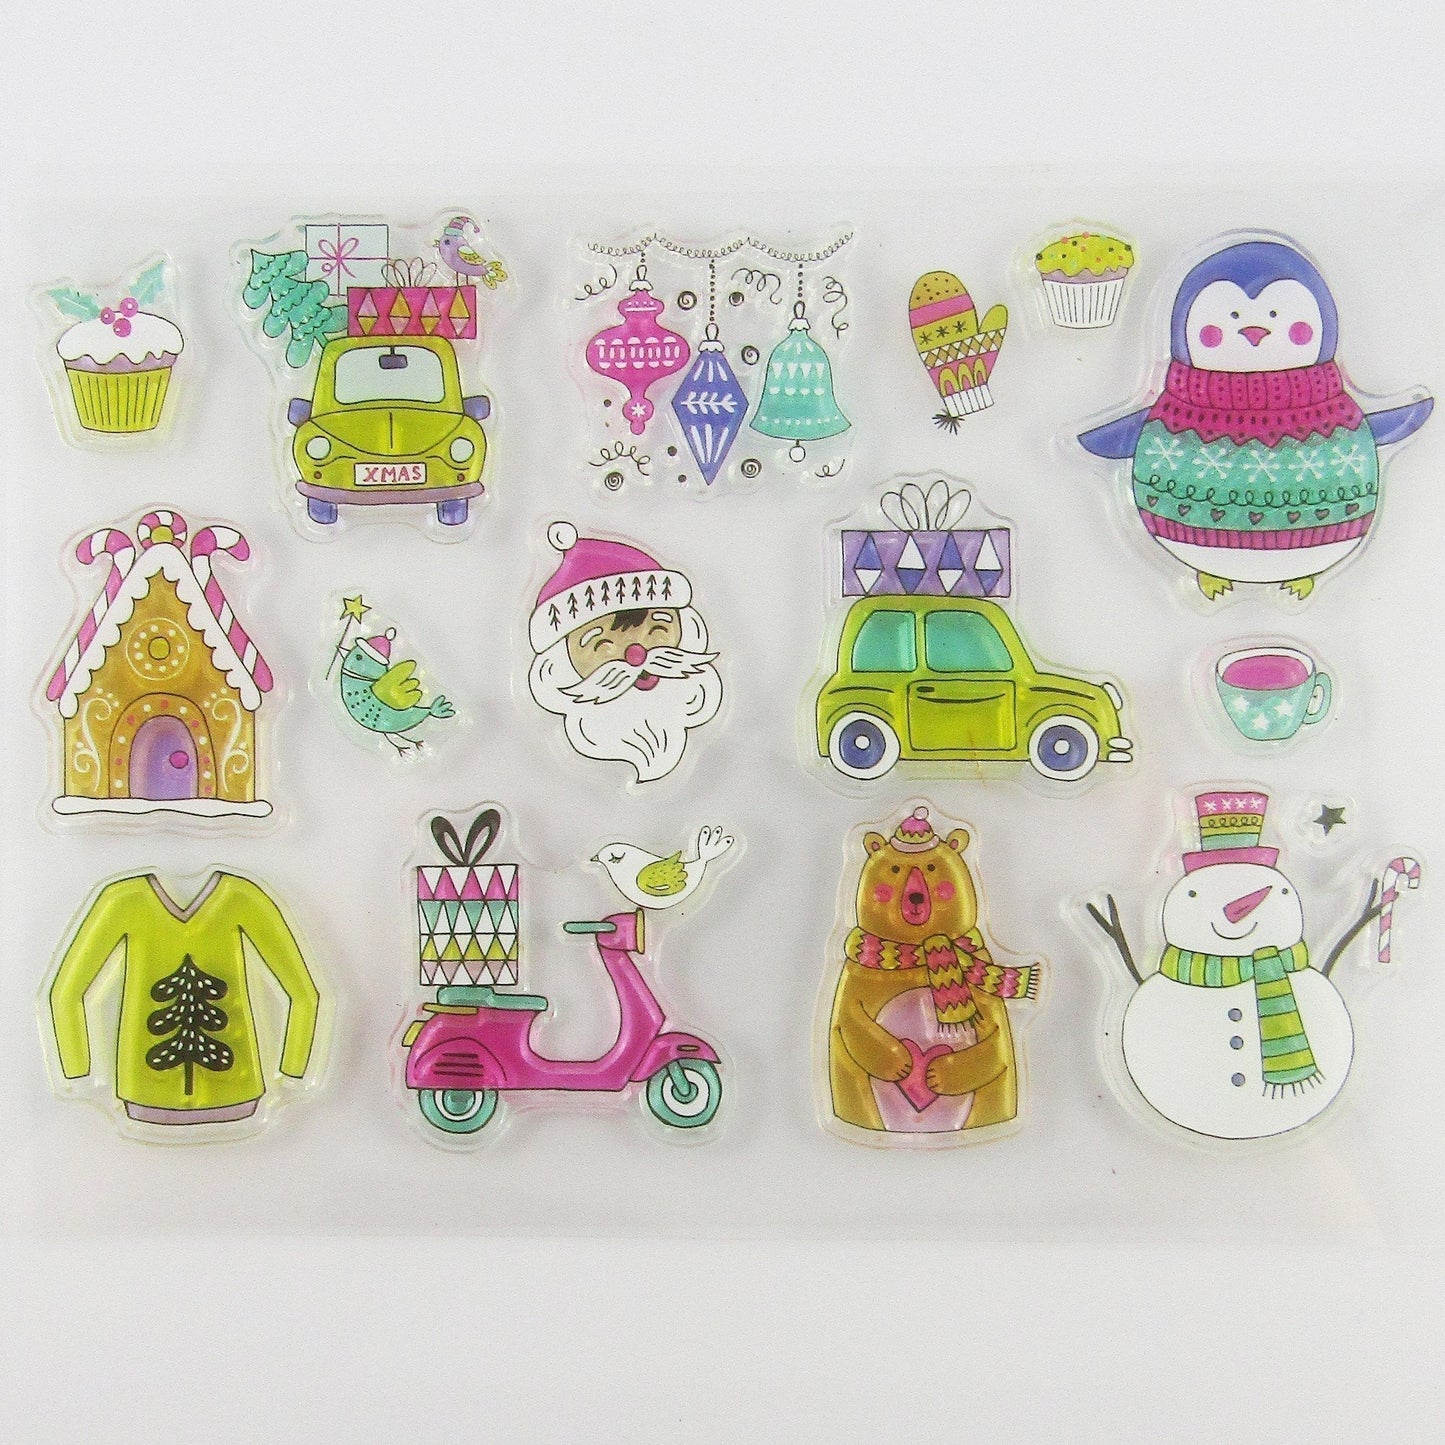 Winter Christmas Holidays Clear Stamp Silicone Rubber Scrapbooking Card Making